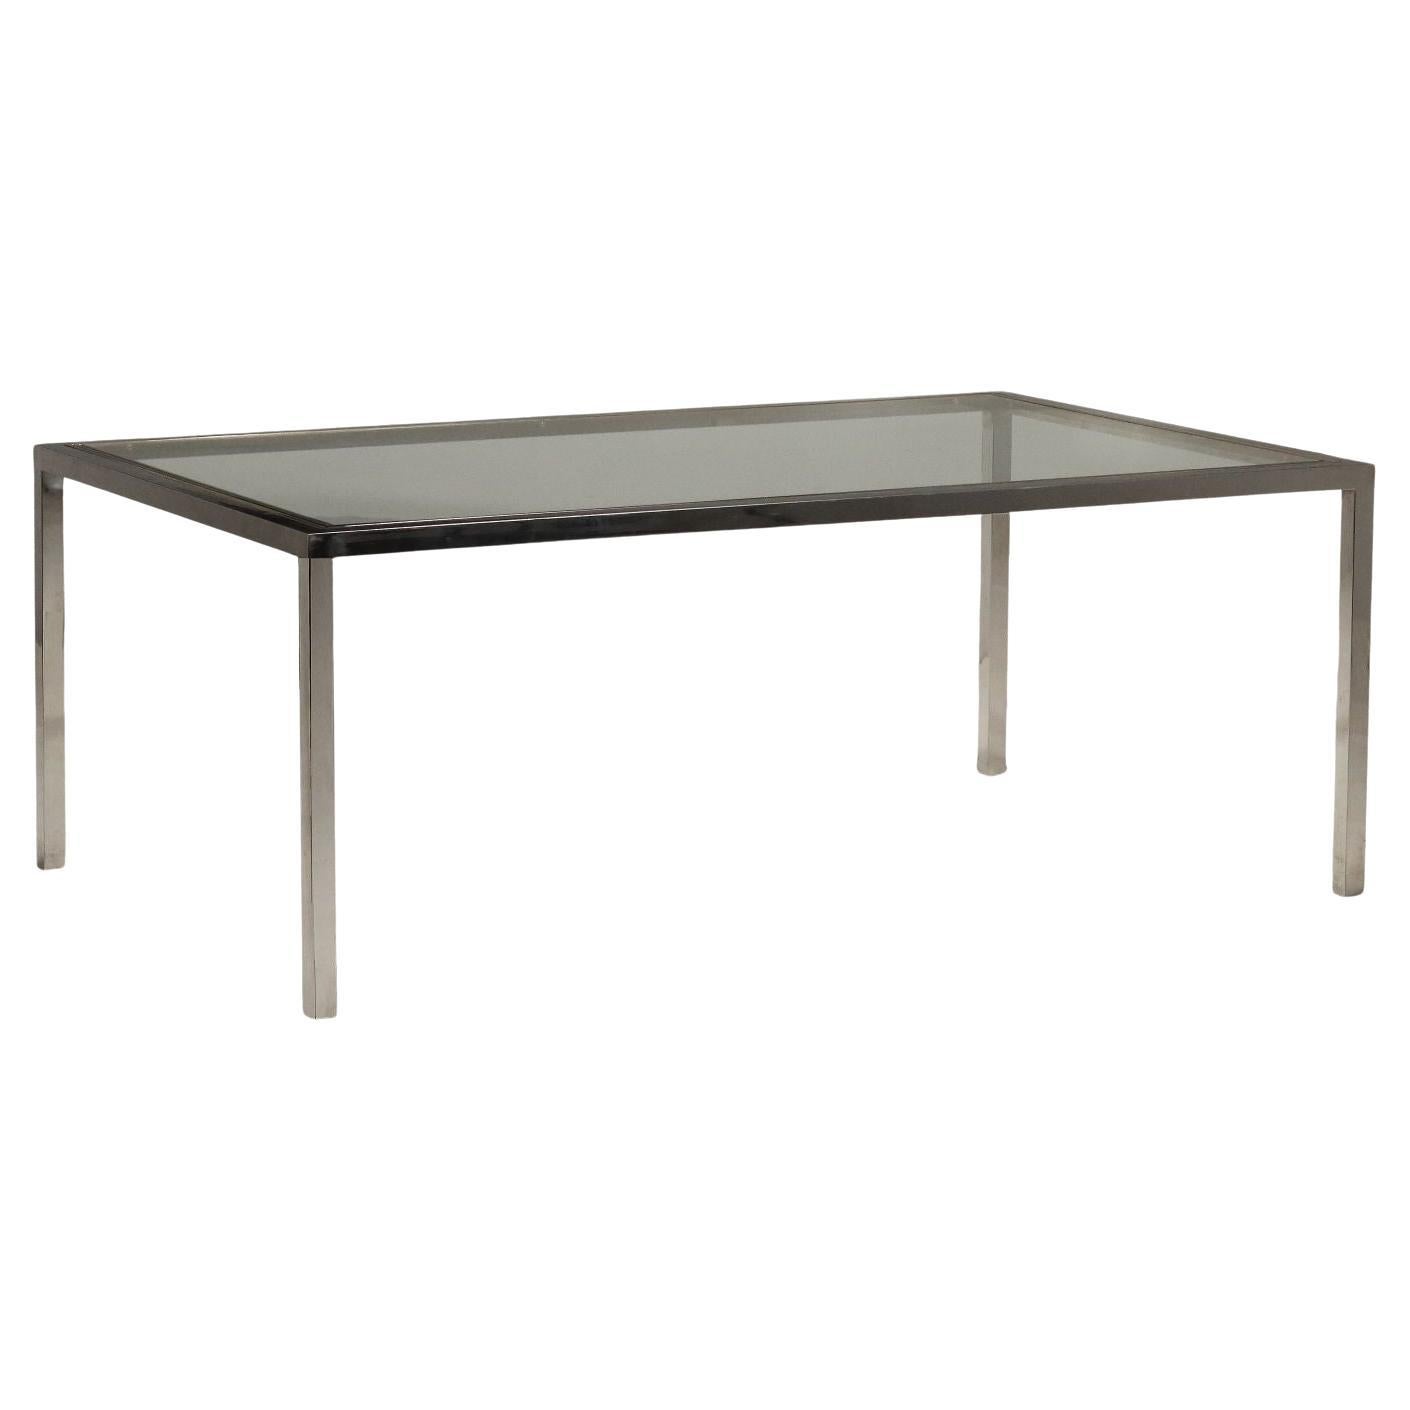 70s steel and glass rectangular table